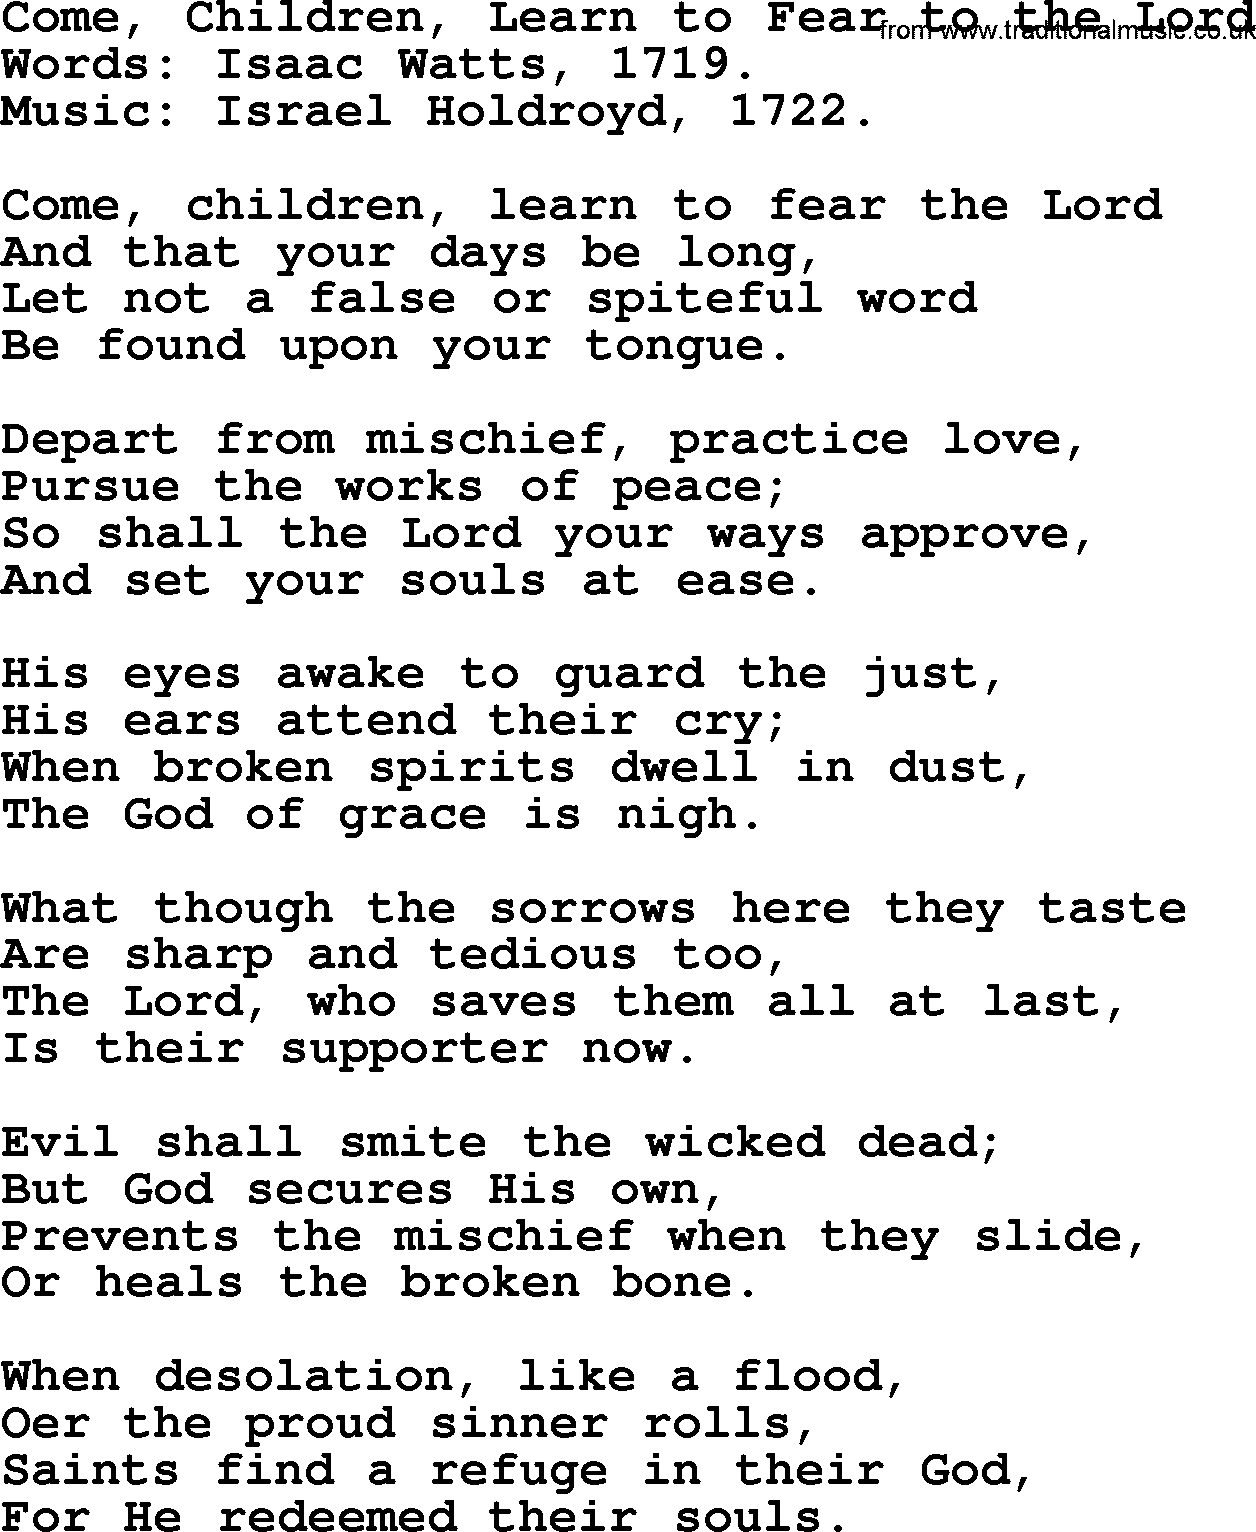 Isaac Watts Christian hymn: Come, Children, Learn to Fear to the Lord- lyricss